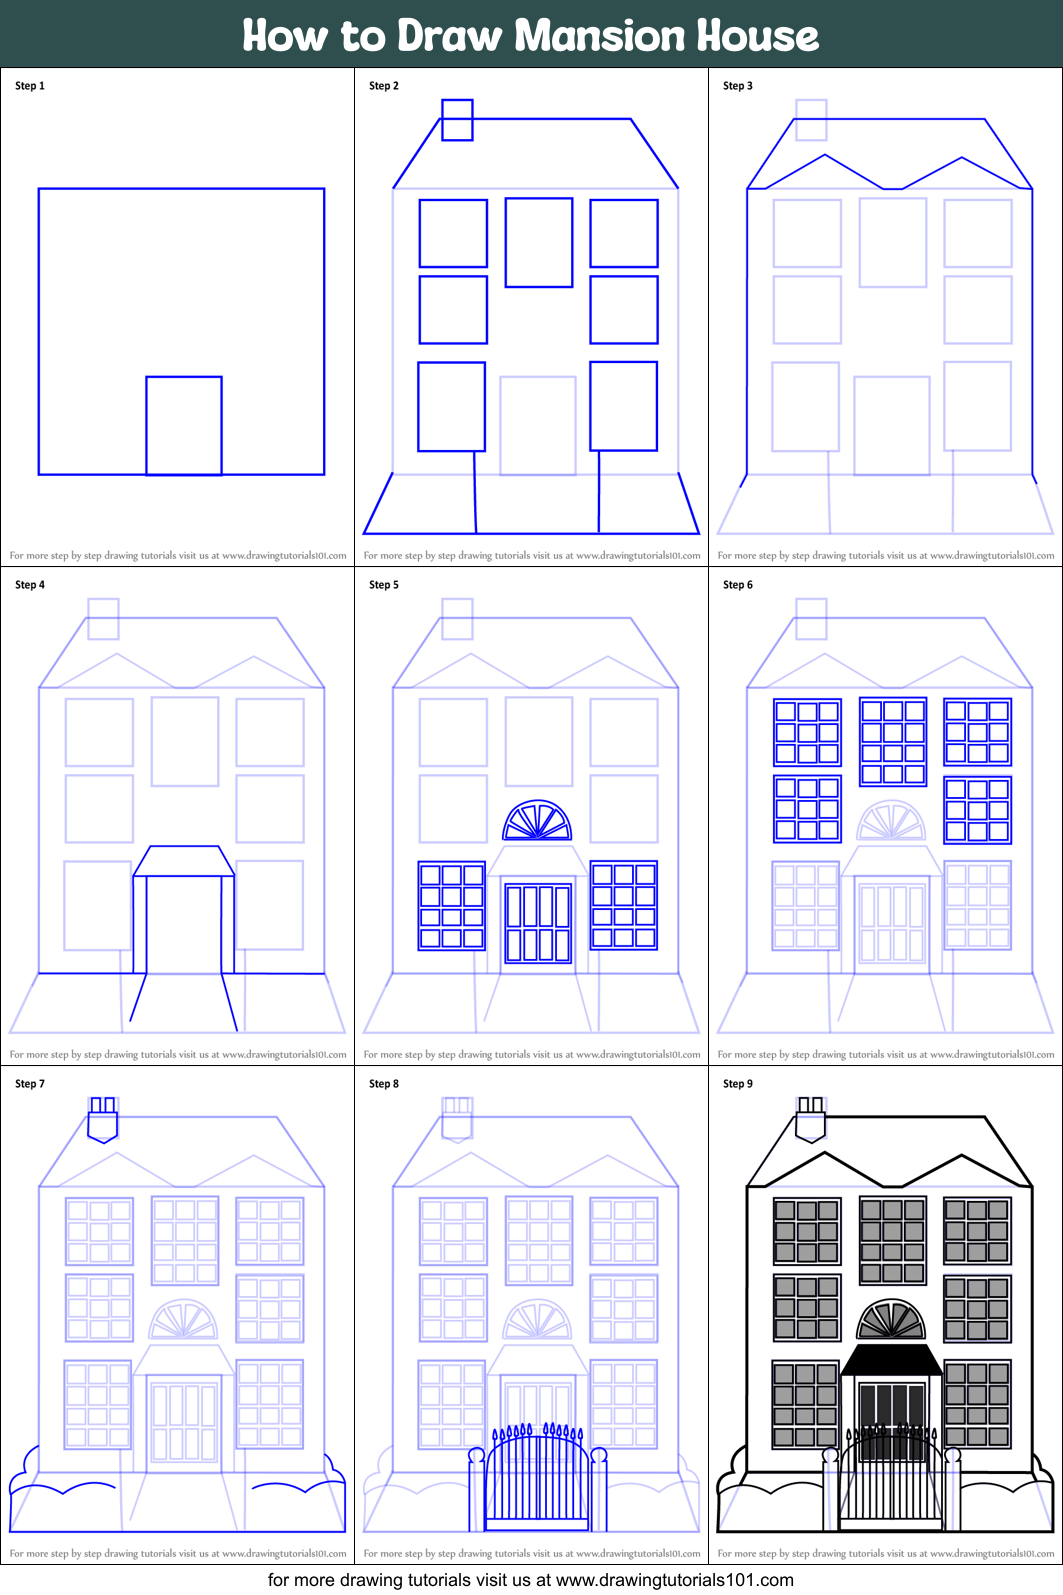 How to Draw Mansion House step by step